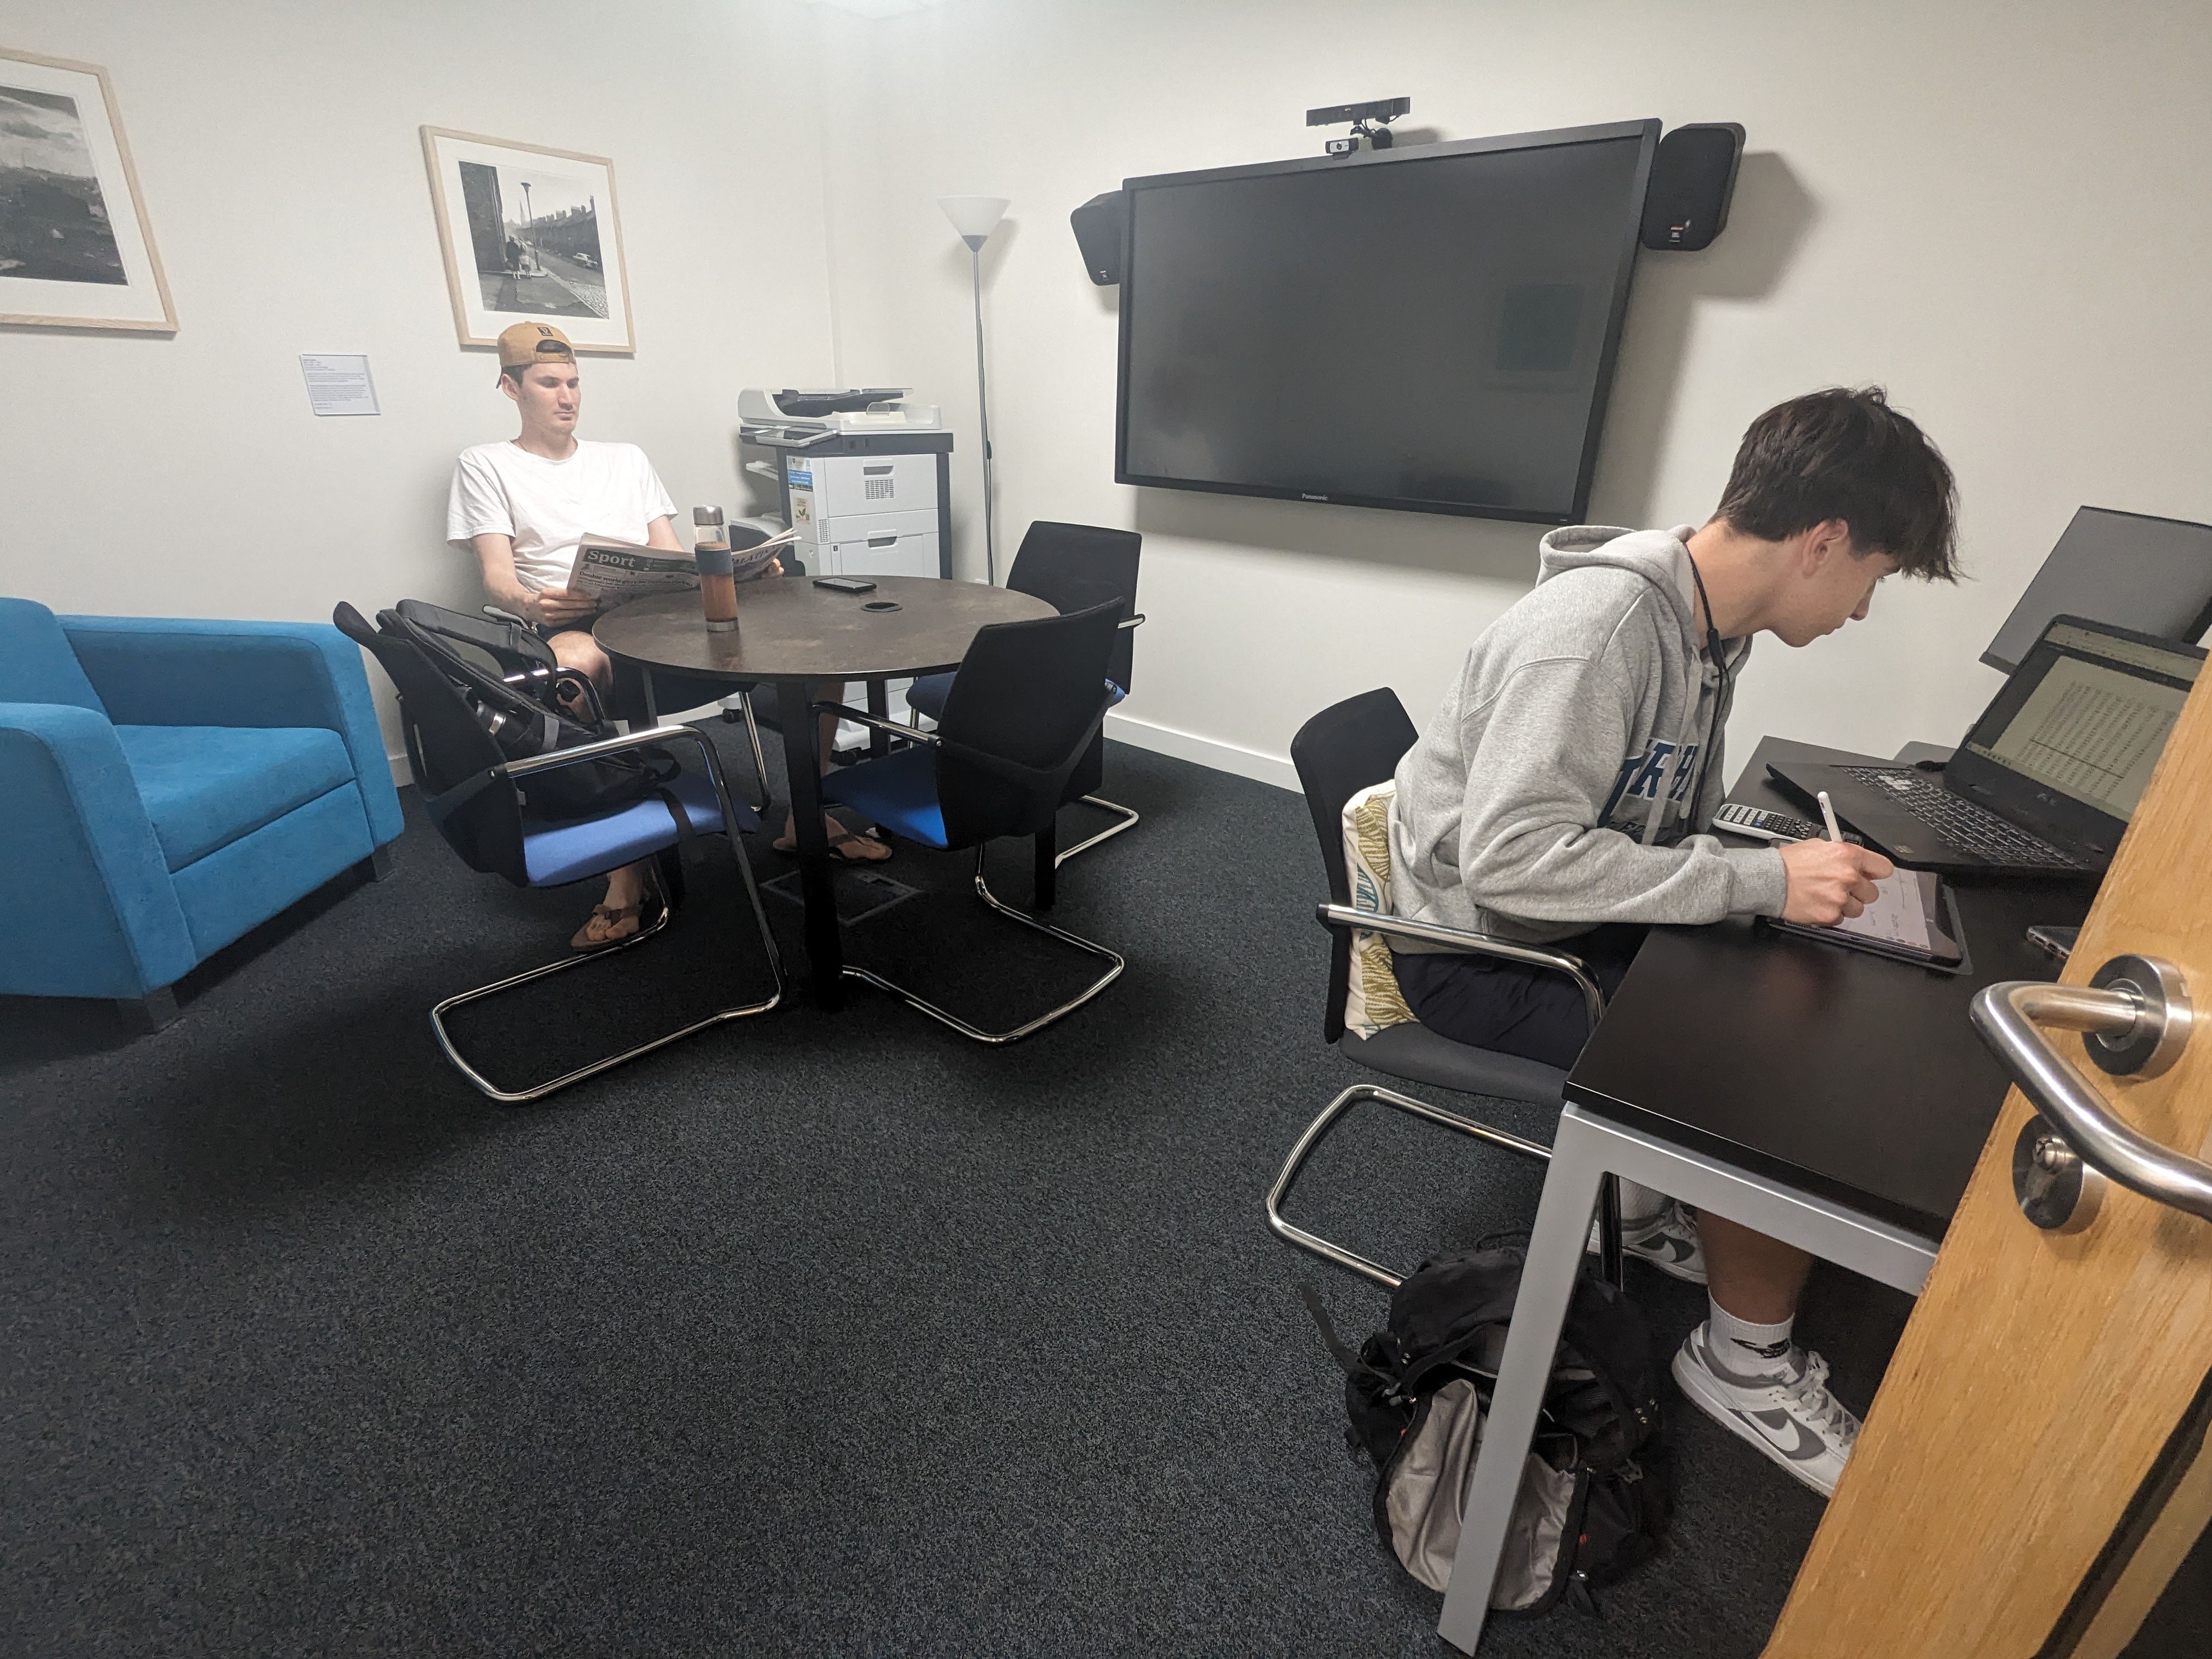 Students studying in The Bateman Room